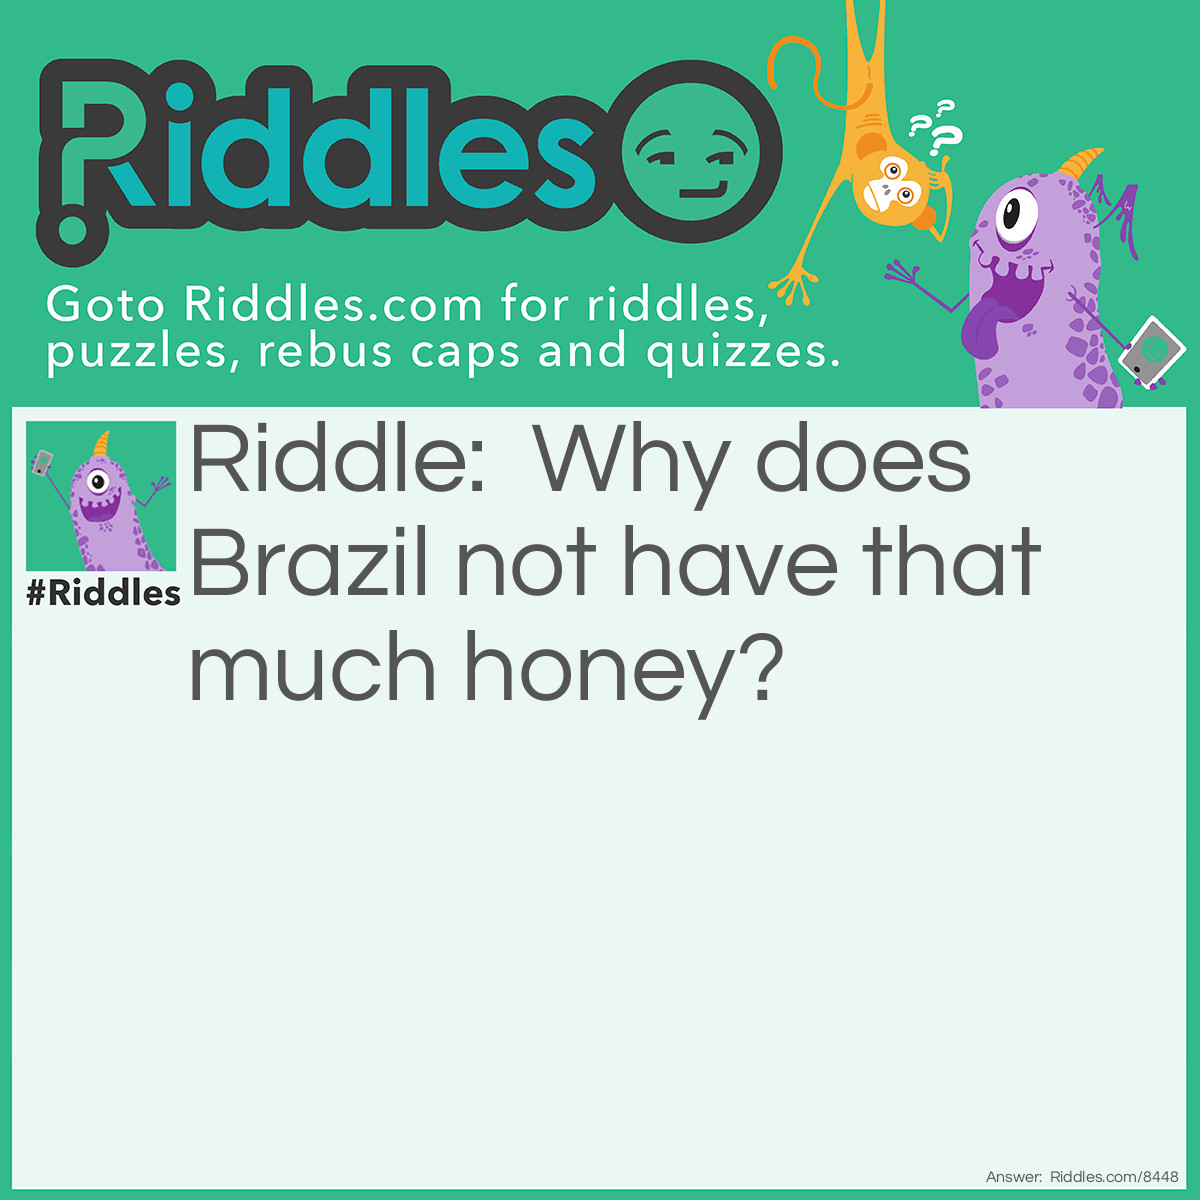 Riddle: Why does Brazil not have that much honey? Answer: Because there's only 1 B/bee in Brazil.